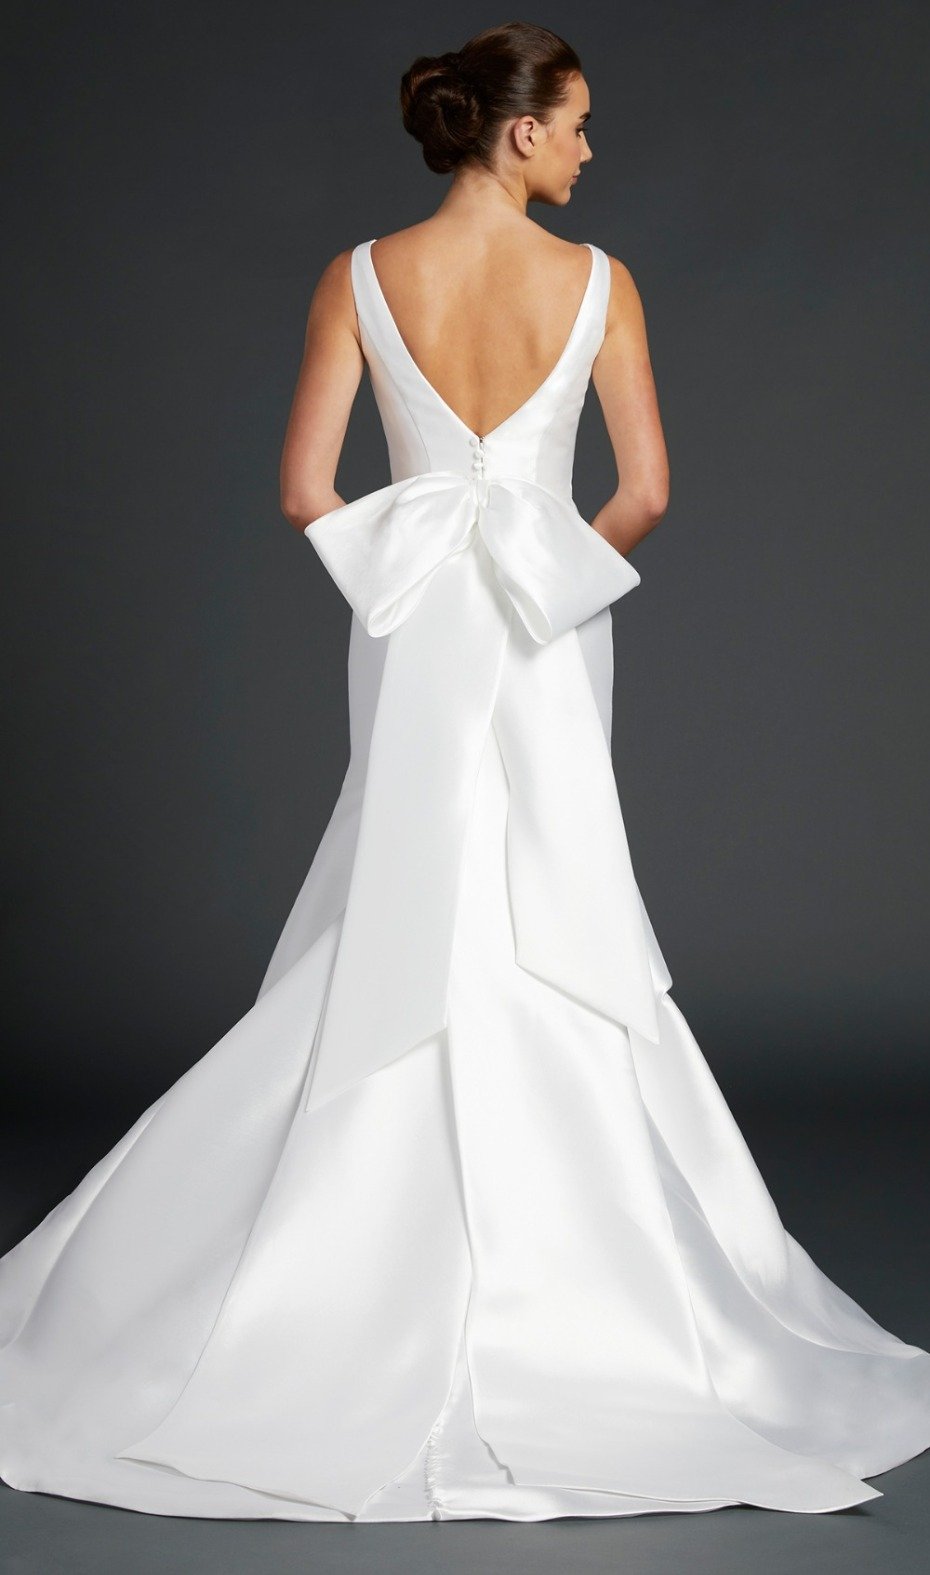 Anne Barge New 2019 Gown with Bow Back Detail